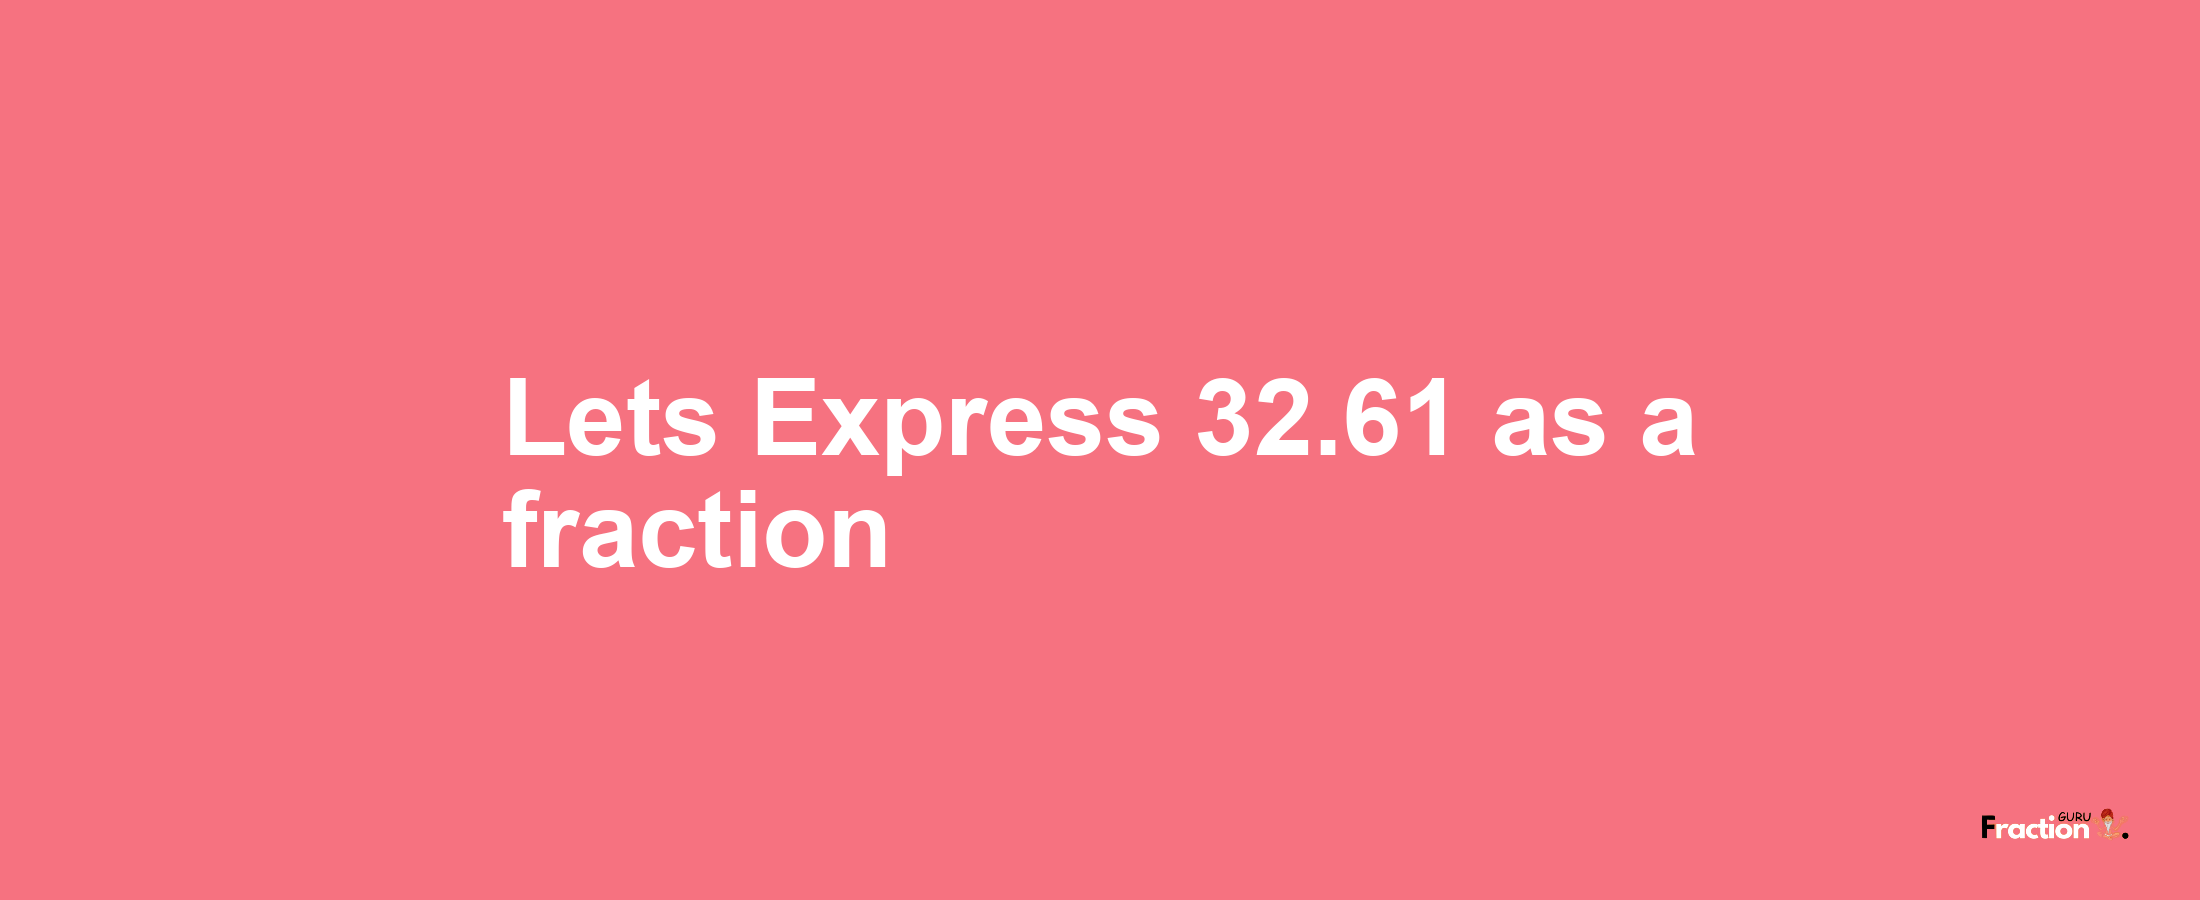 Lets Express 32.61 as afraction